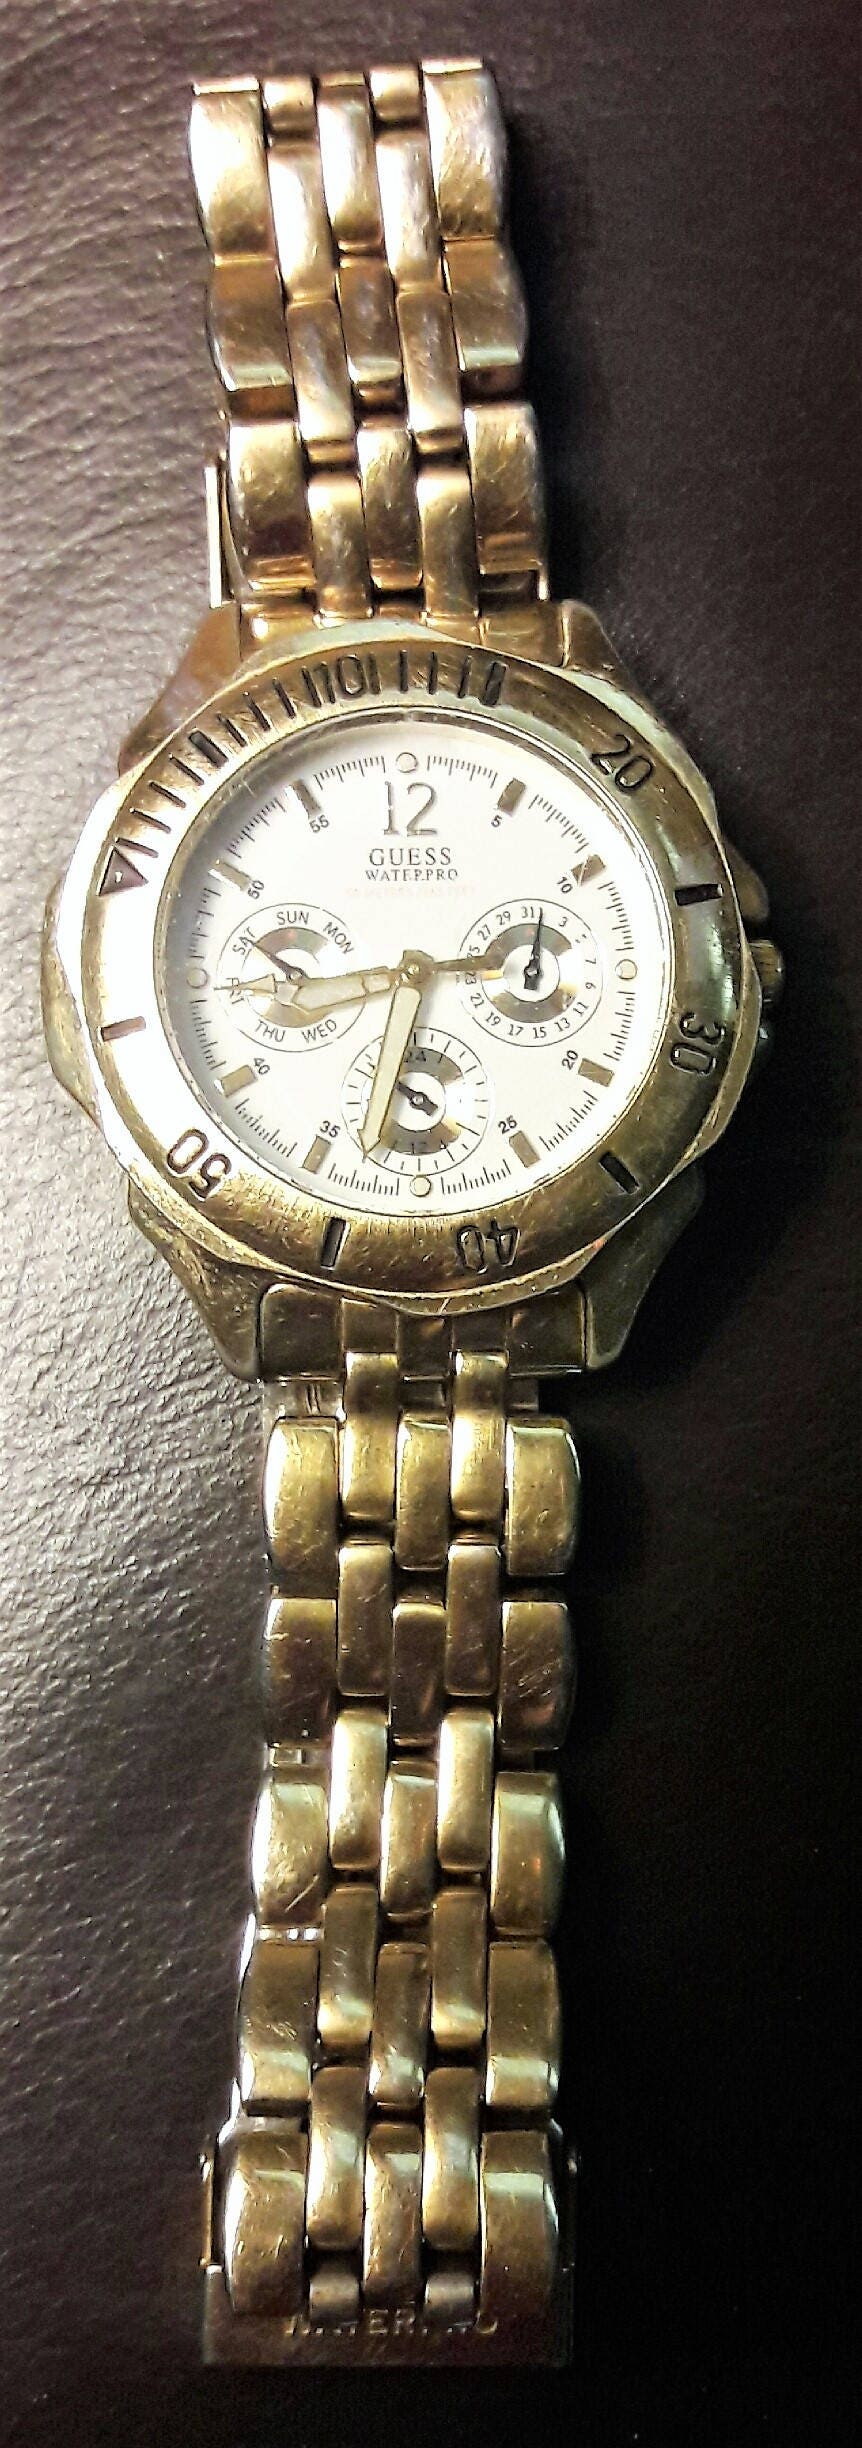 Guess Waterpro Chronographers Mens Gold Tone Watch Vintage